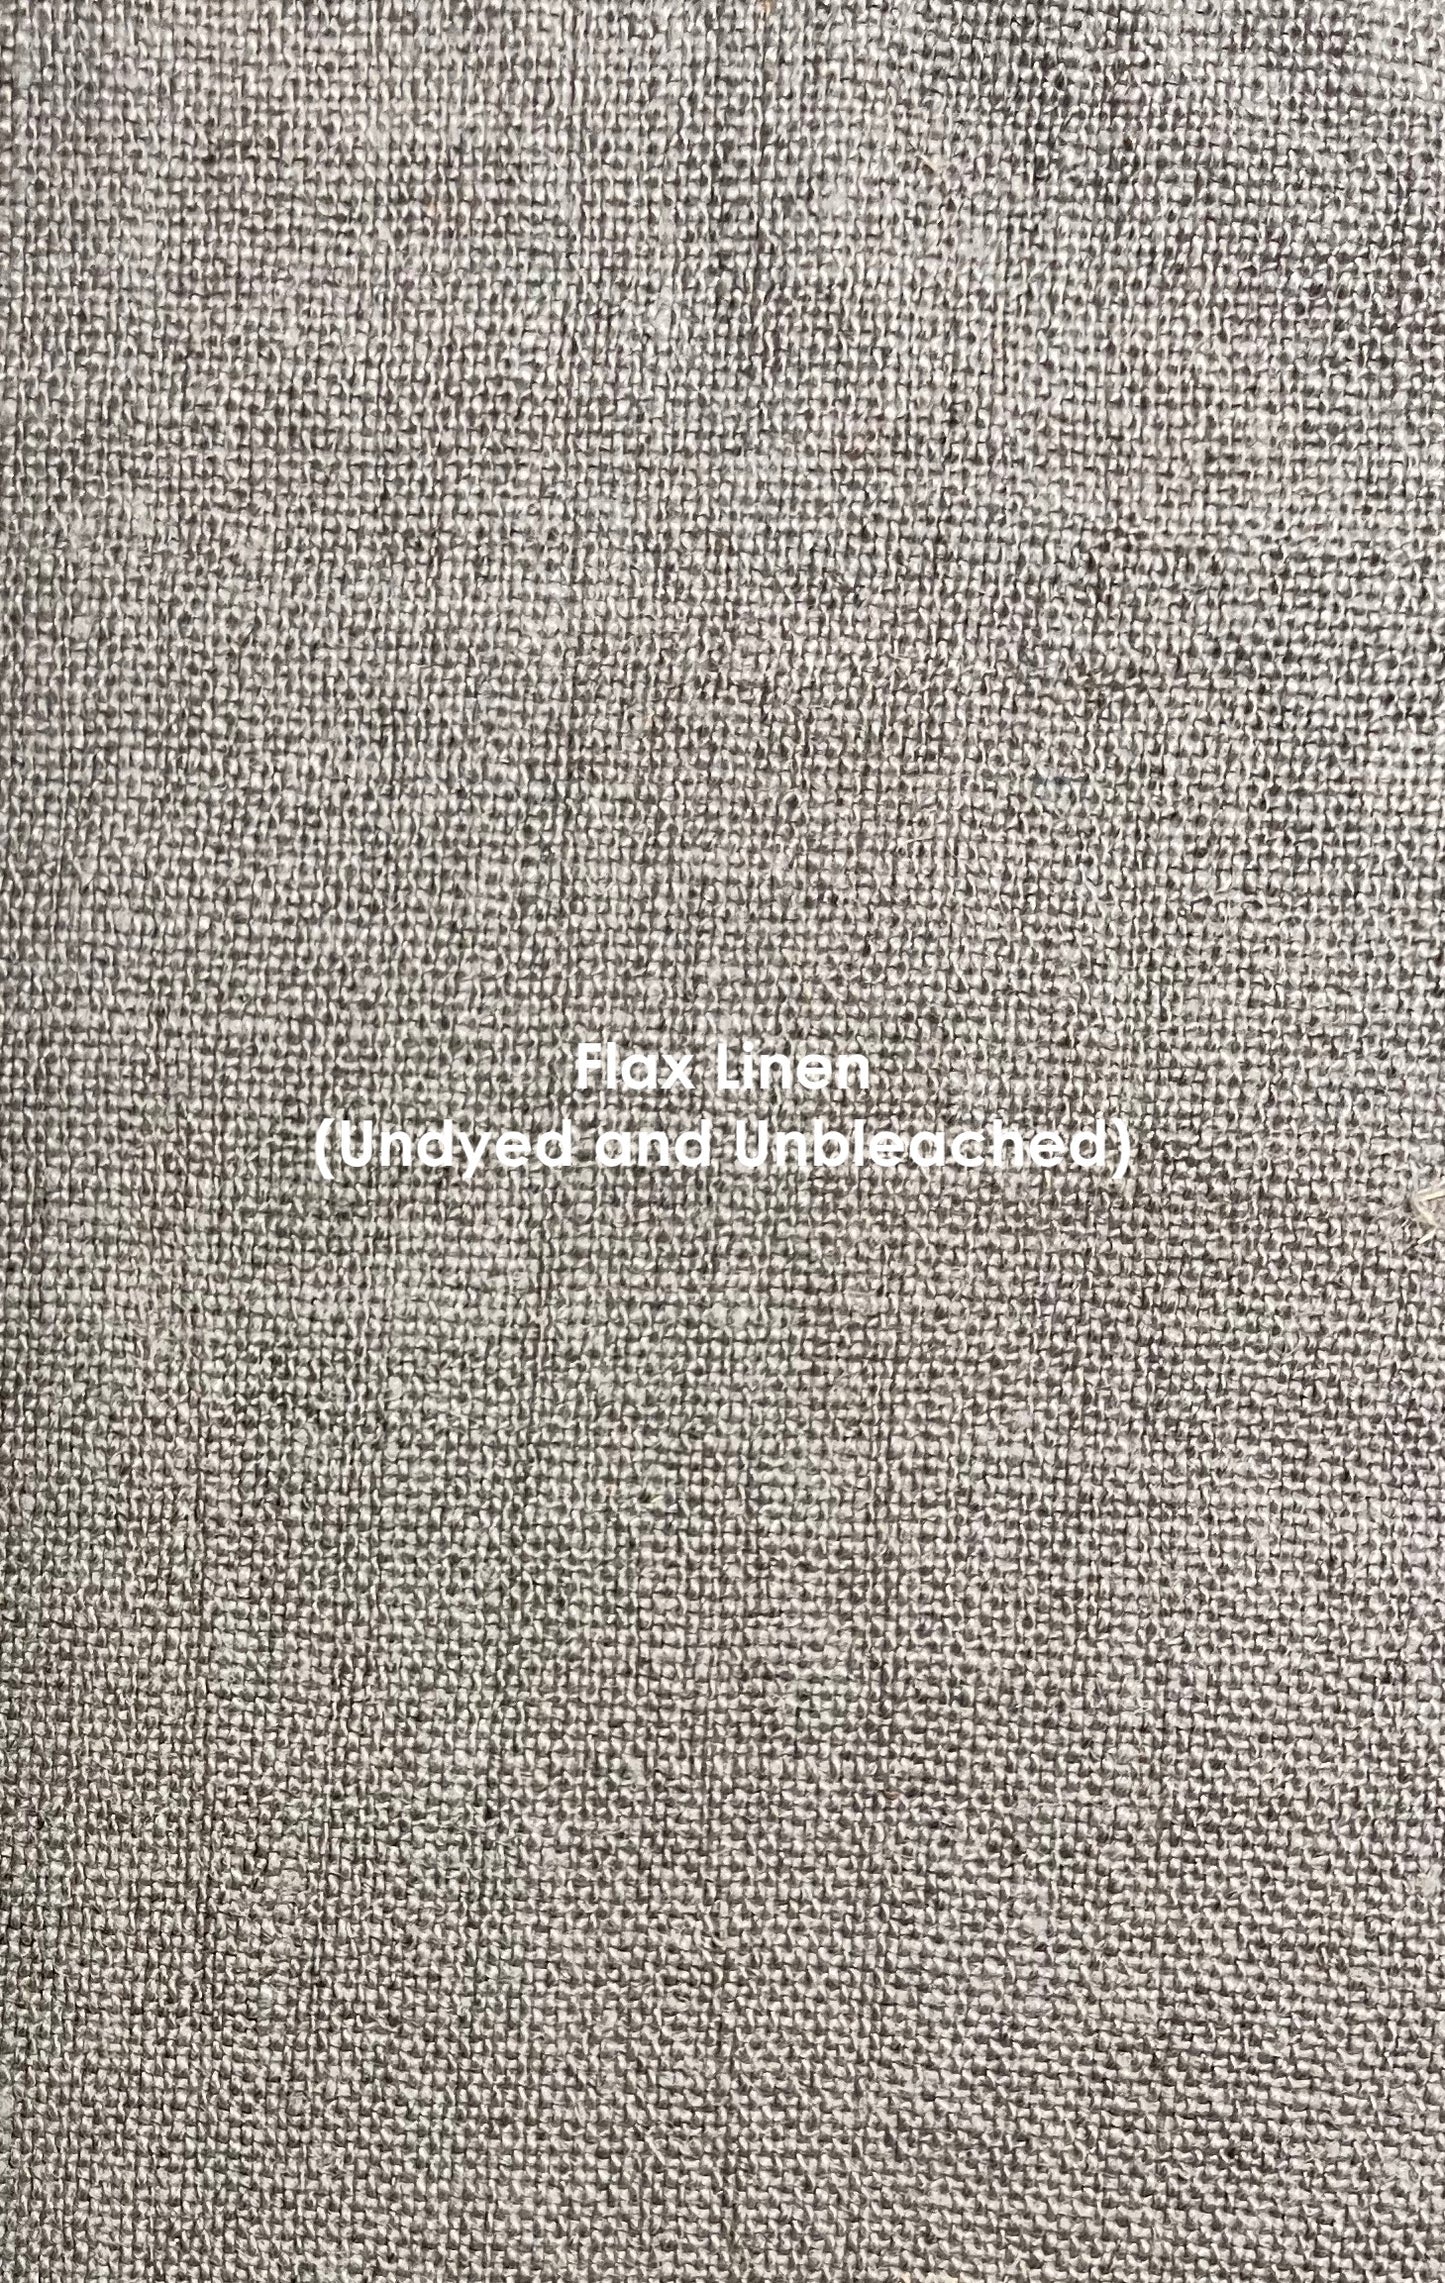 A close up of flax linen (undyed and unbleached). It reads as taupe